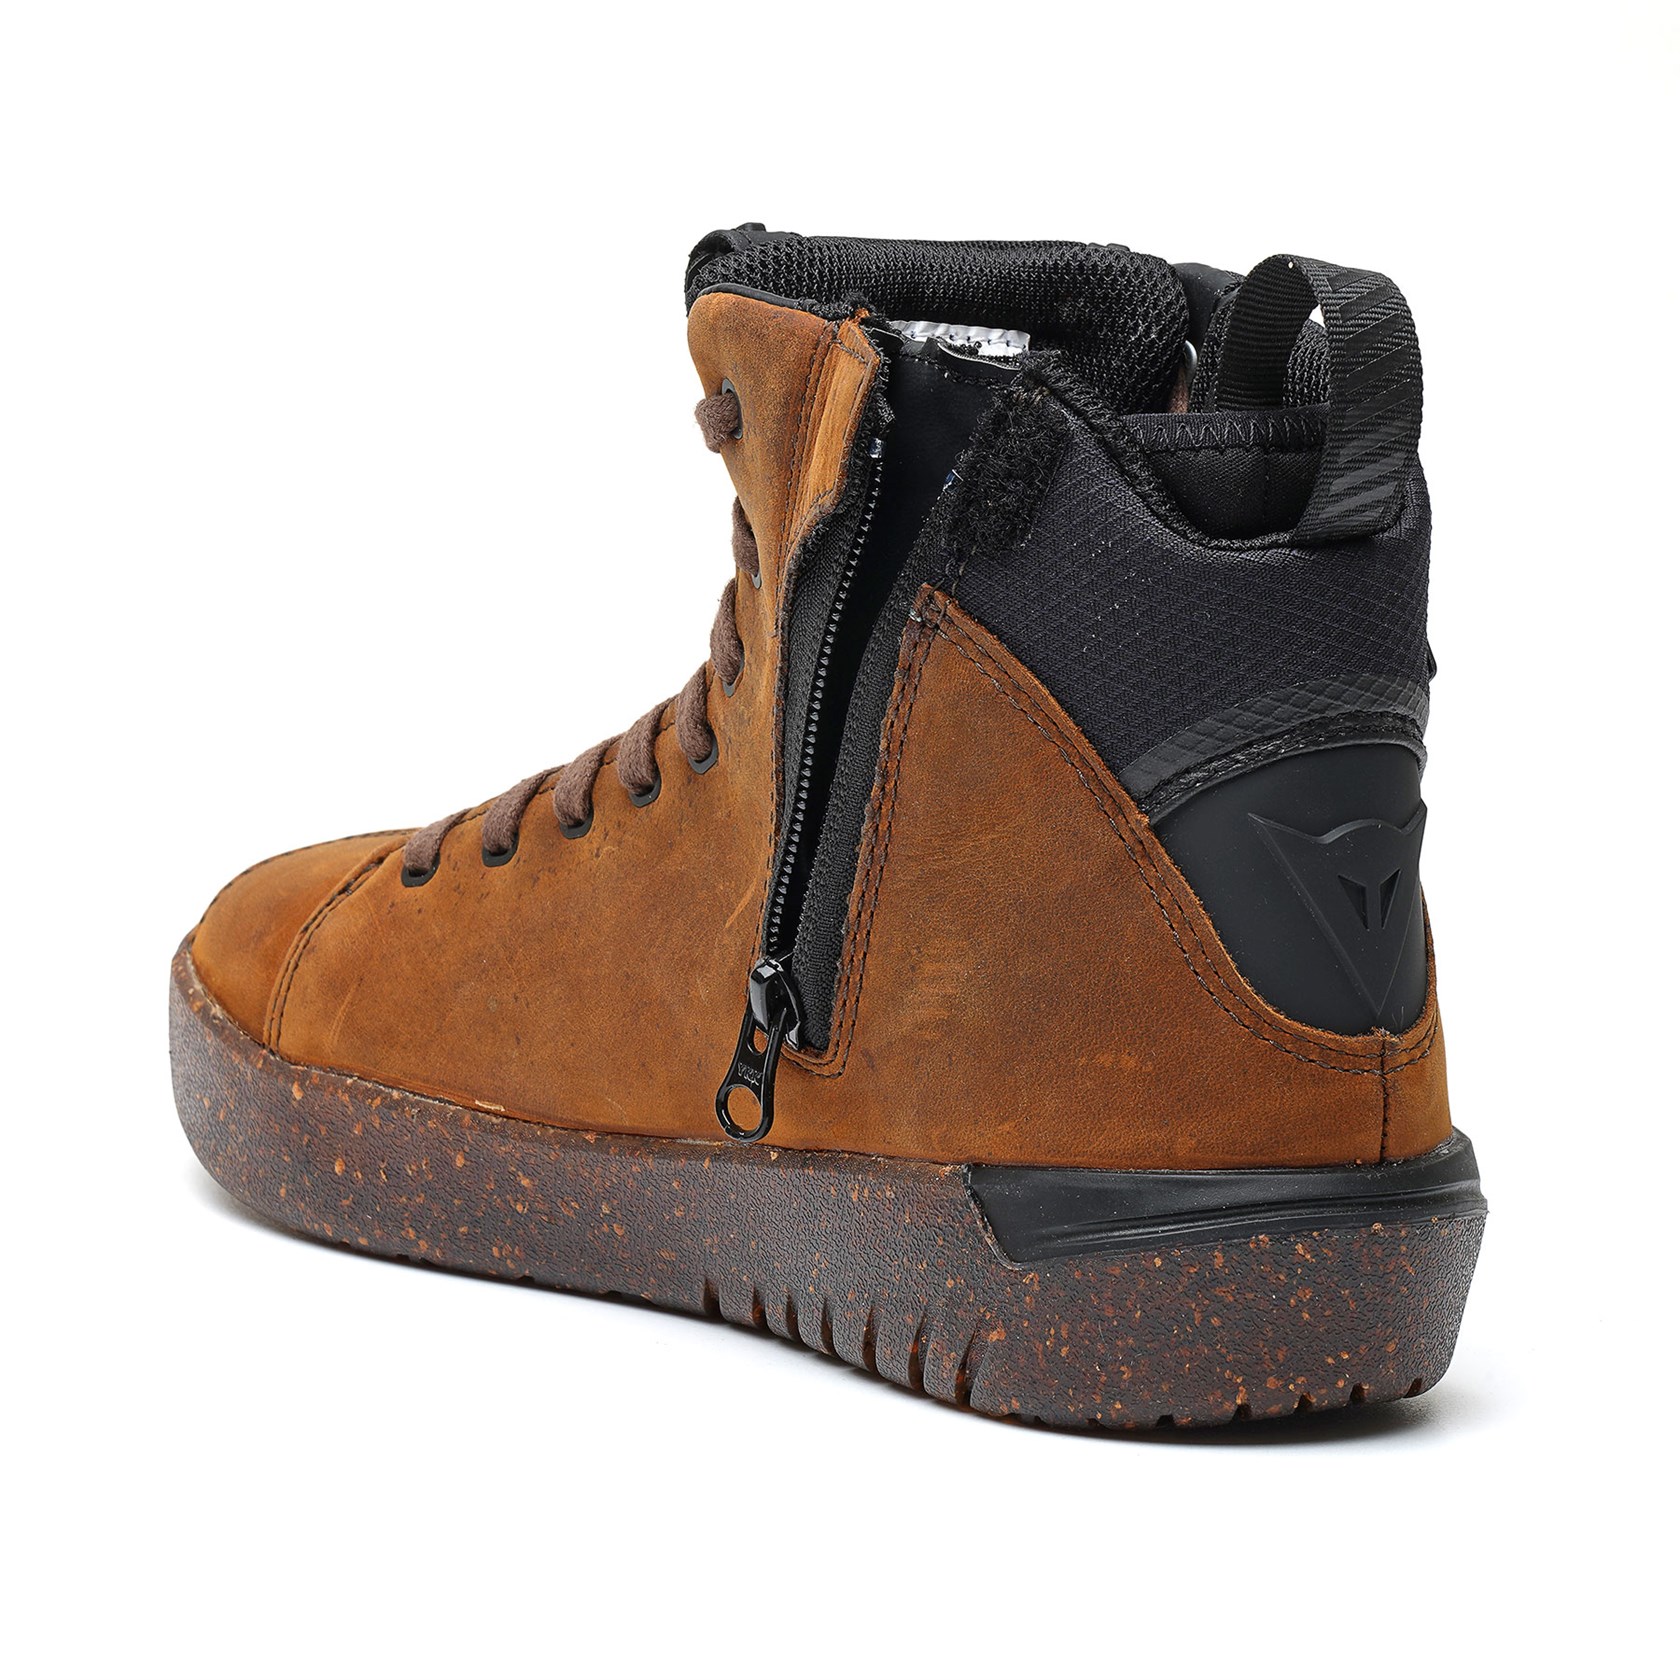 Dainese Metractive D-WP boots in brown